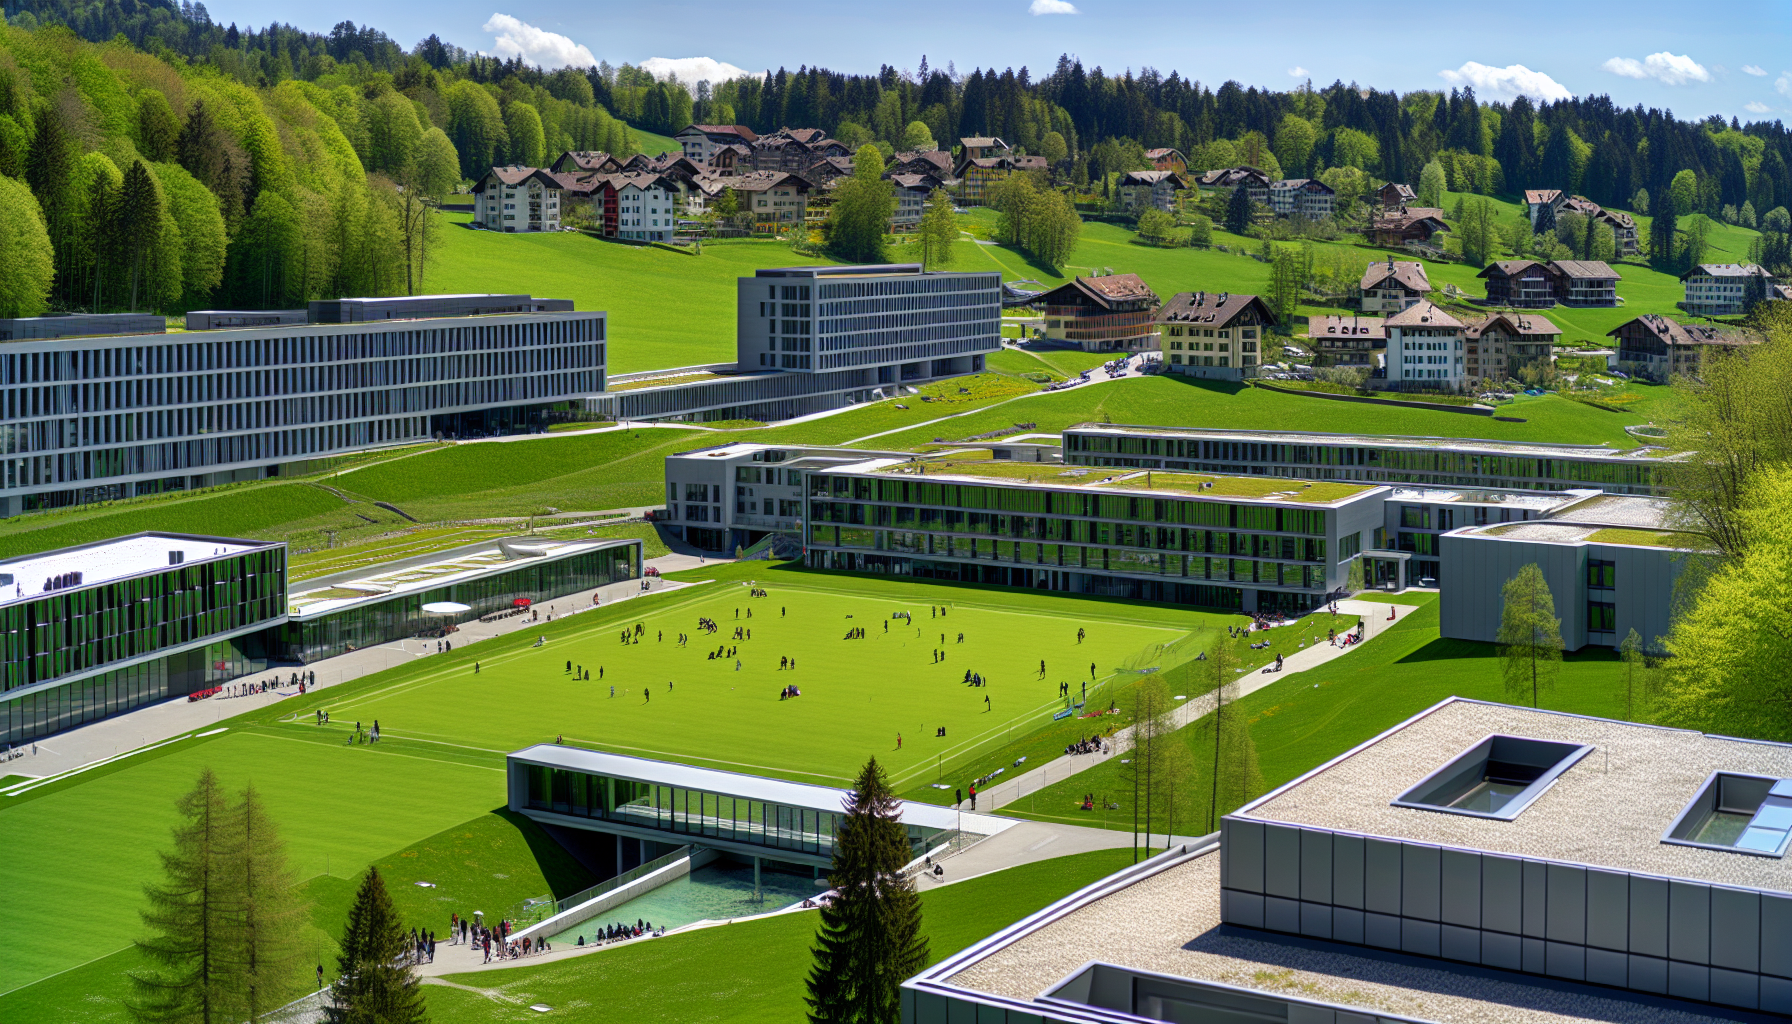 Campus Life at Rolle and Gstaad